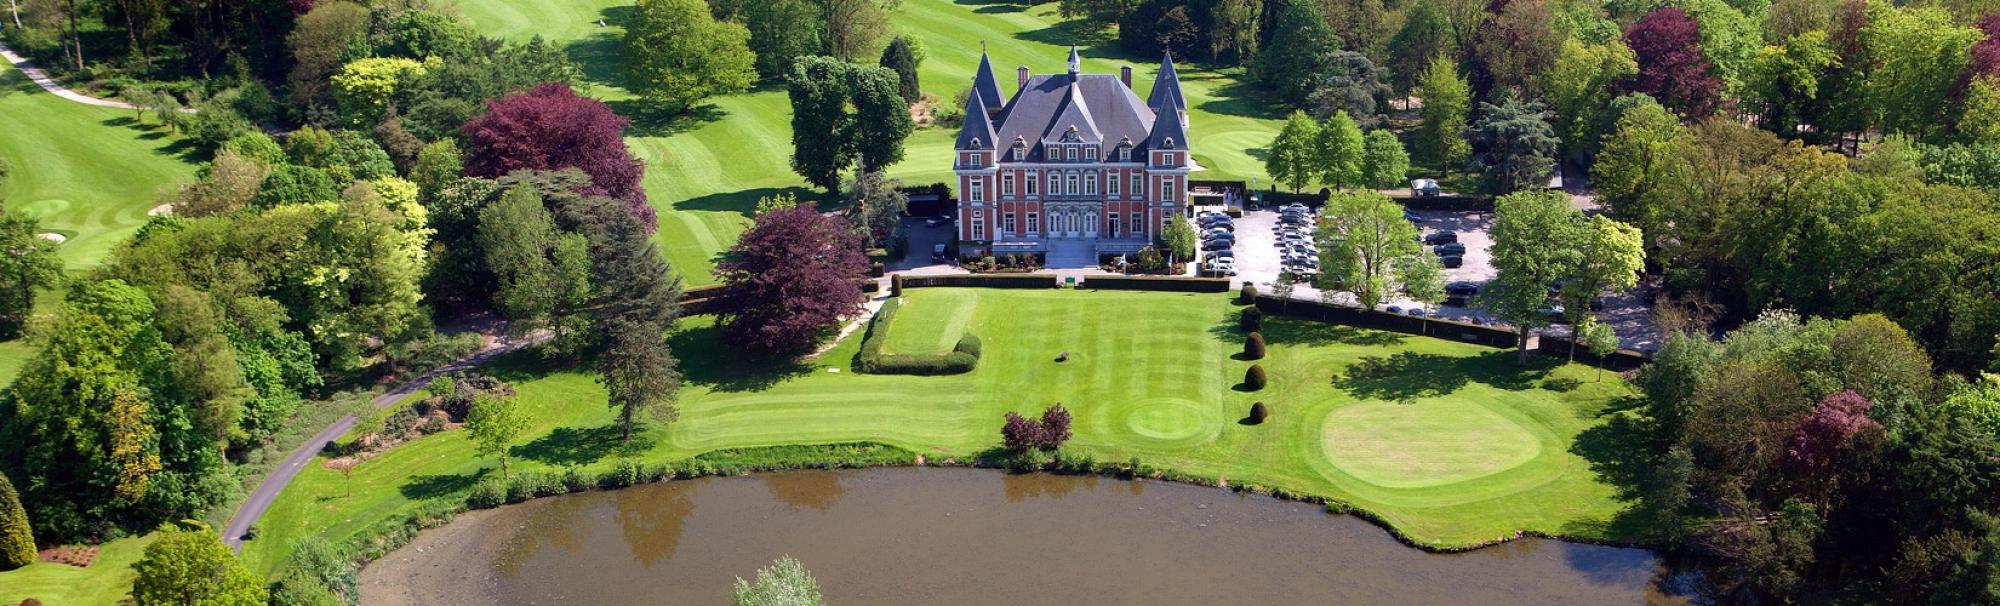 All The Golf & Countryclub Oudenaarde's impressive golf course within brilliant Bruges & Ypres.